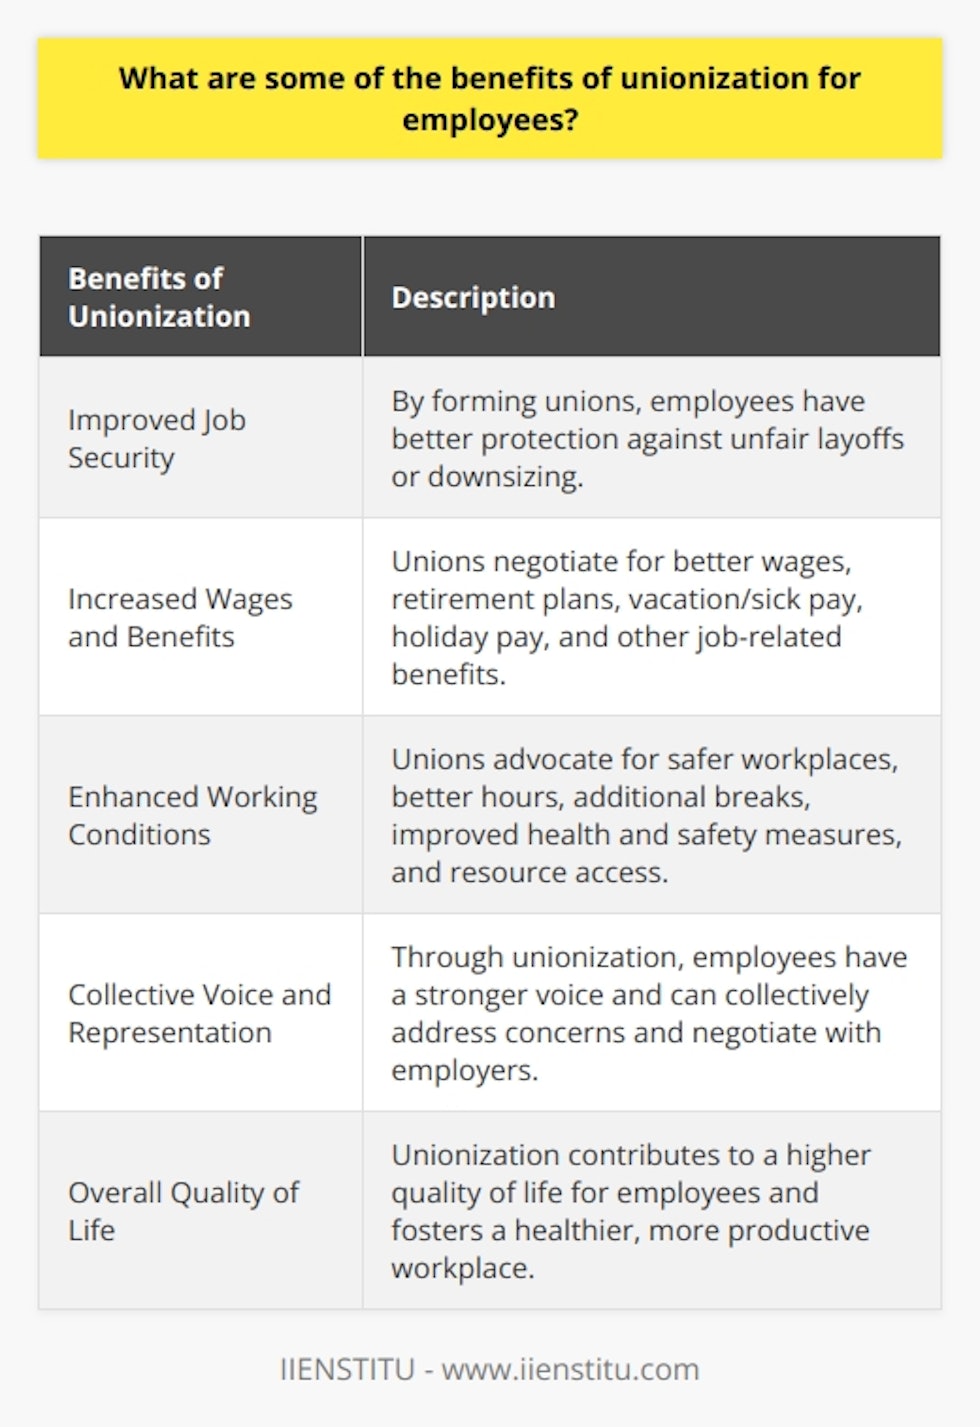 Unionization offers several benefits for employees, including improved job security, wages, and working conditions. When employees join together and form a union, they can collectively voice their concerns and negotiate with their employers for more favorable terms.One of the key advantages of unionization is enhanced job security. By organizing bargaining units, which are groups of employees in the same job, unions can negotiate better terms in cases of layoffs or downsizing. This means that employees have a higher level of protection against unjust firings and can feel more secure in their positions.In addition, unionization can lead to increased wages and benefits for employees. Through collective bargaining, unions negotiate with employers to establish wages and benefits packages that are more favorable to employees. This can result in higher salaries, improved retirement plans, additional vacation or sick pay, holiday pay, and other job-related benefits. These increases in wages and benefits can significantly improve employees' financial situation and overall quality of life.Furthermore, unions can work towards improving working conditions for employees. They can advocate for safer workplaces with better working conditions, negotiate for better hours and additional breaks, and push for improved health and safety measures. Unions also have the power to address issues related to resource access, ensuring that employees have the necessary tools and materials to perform their jobs effectively. By collectively working towards these improvements, employees can experience a better work environment and have a more positive overall working experience.Overall, unionization provides employees with numerous benefits, such as increased job security, better wages, and improved working conditions. By joining together and forming a union, employees can have a collective voice and work towards ensuring their interests are considered and protected. This can lead to a higher quality of life for employees and contribute to a healthier, more productive workplace.